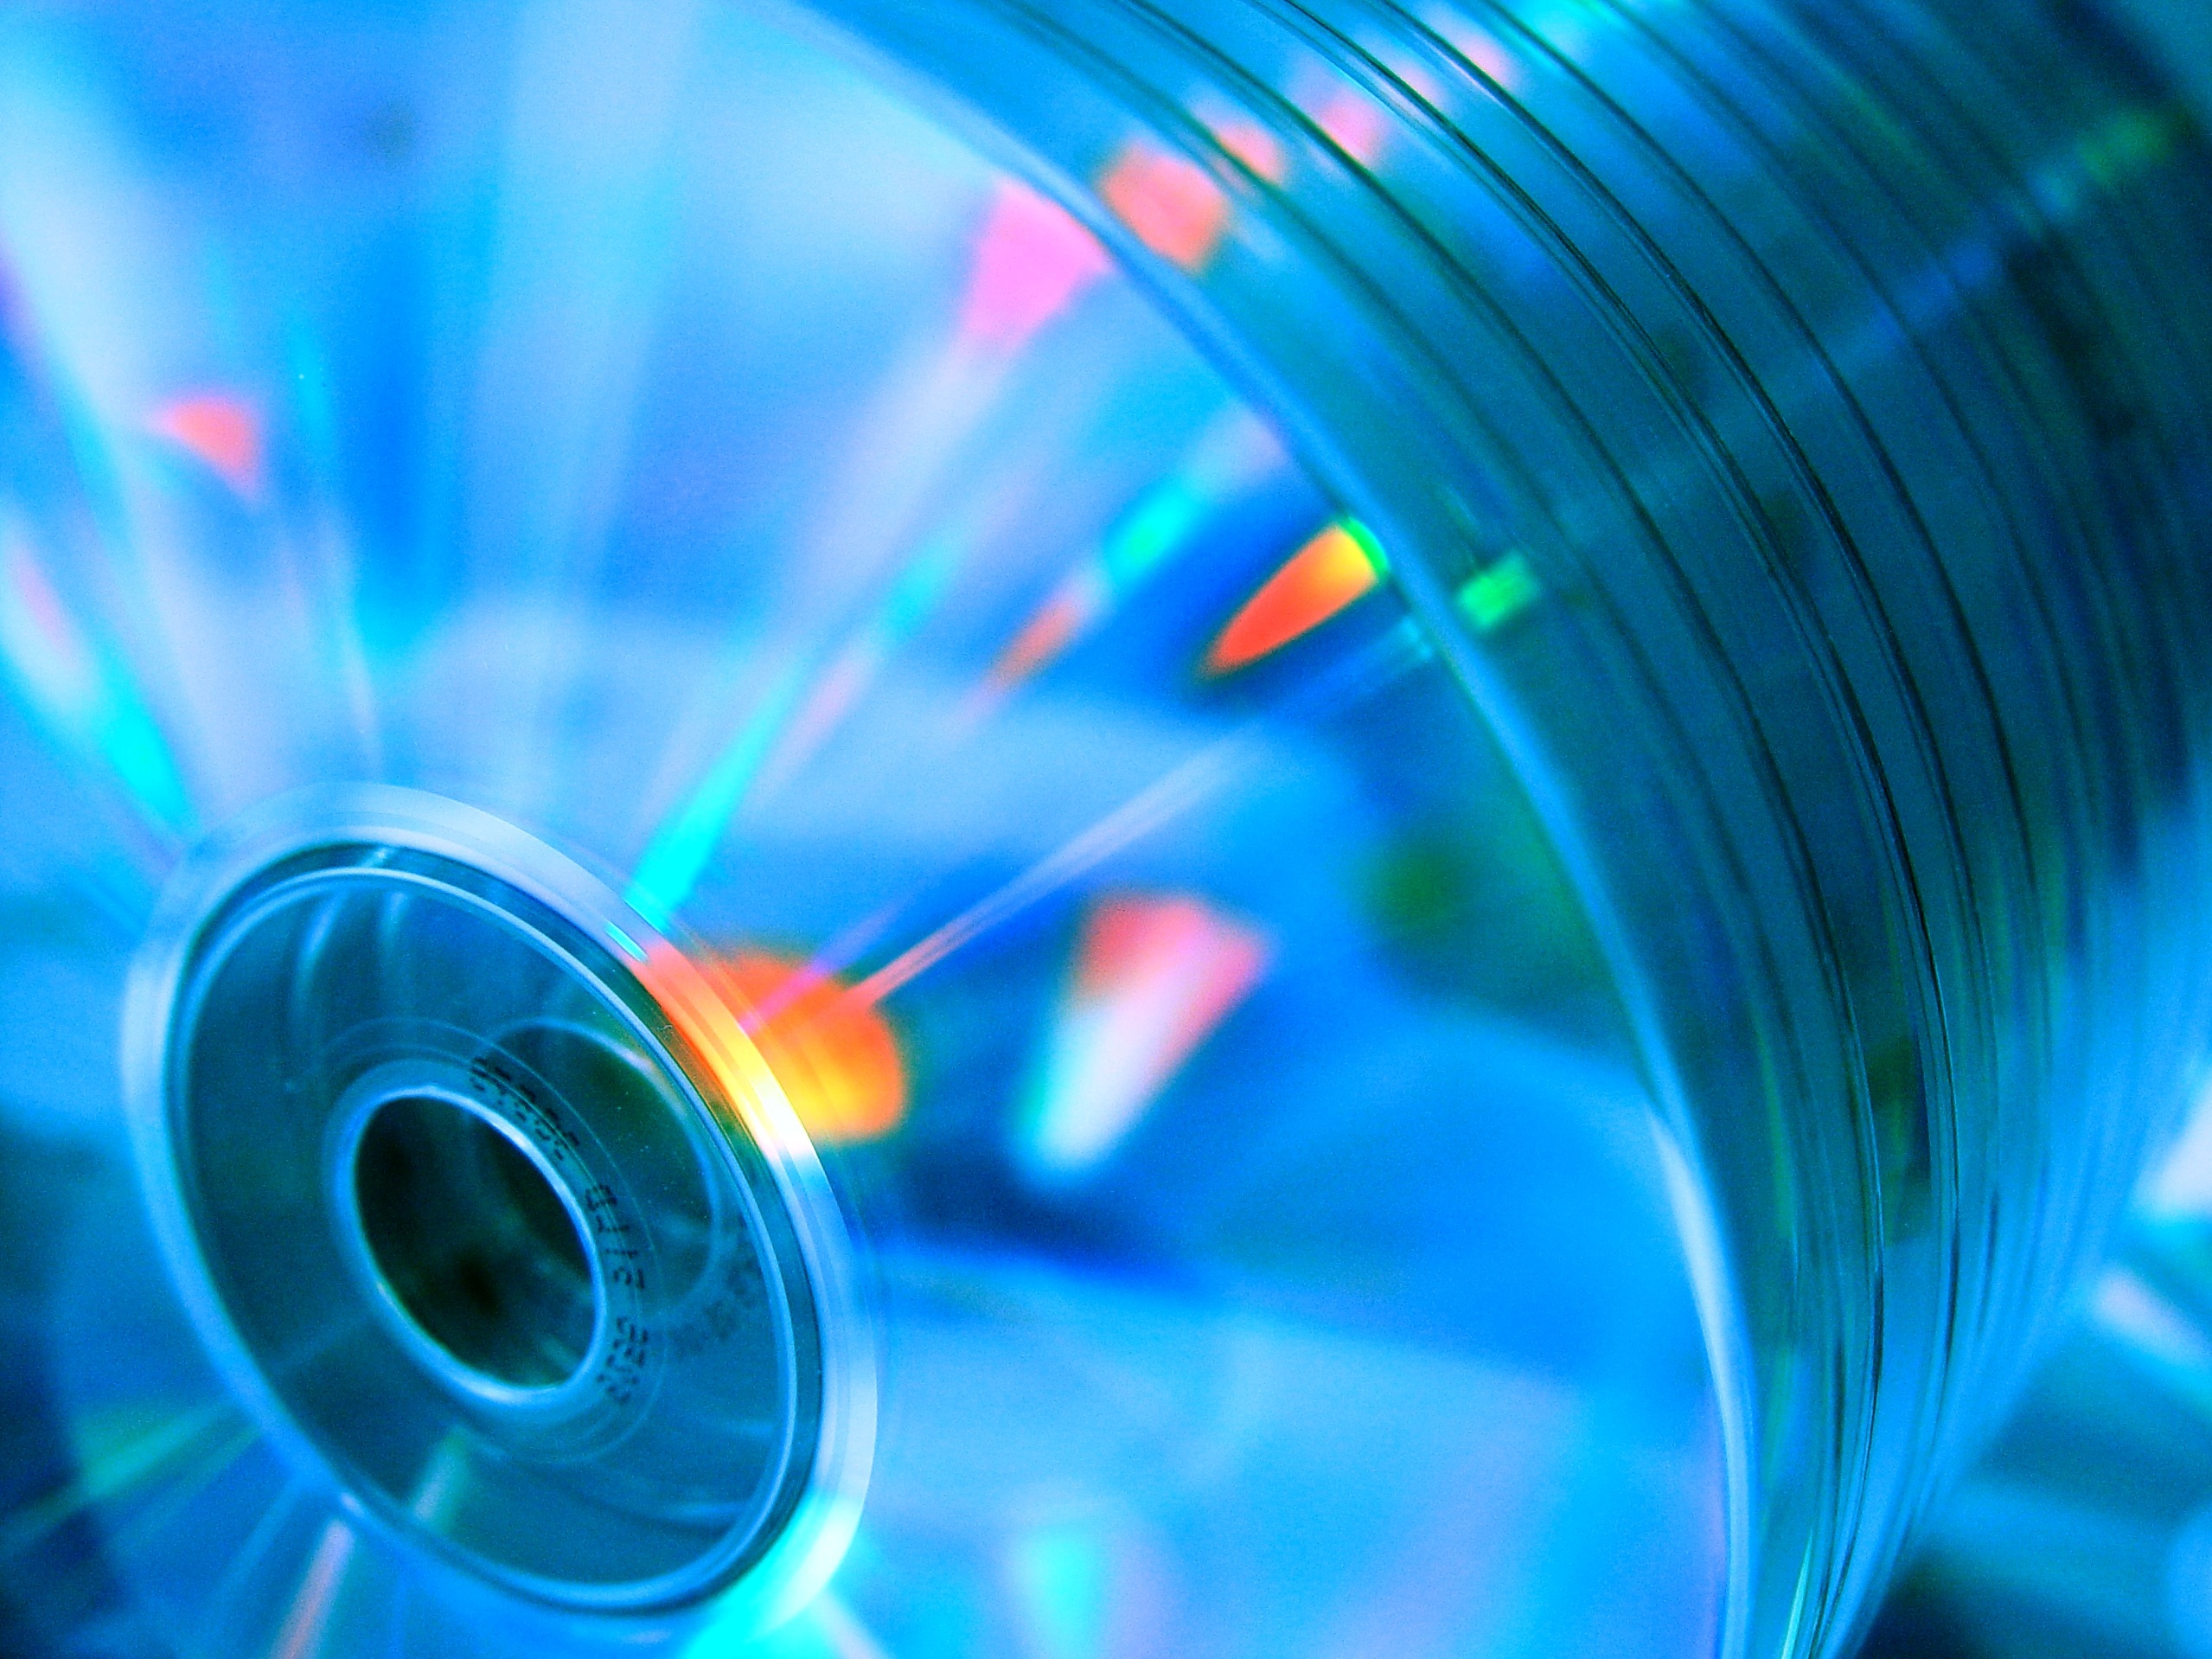 how-to-fit-1tb-of-data-on-one-cd-sized-disc-techradar